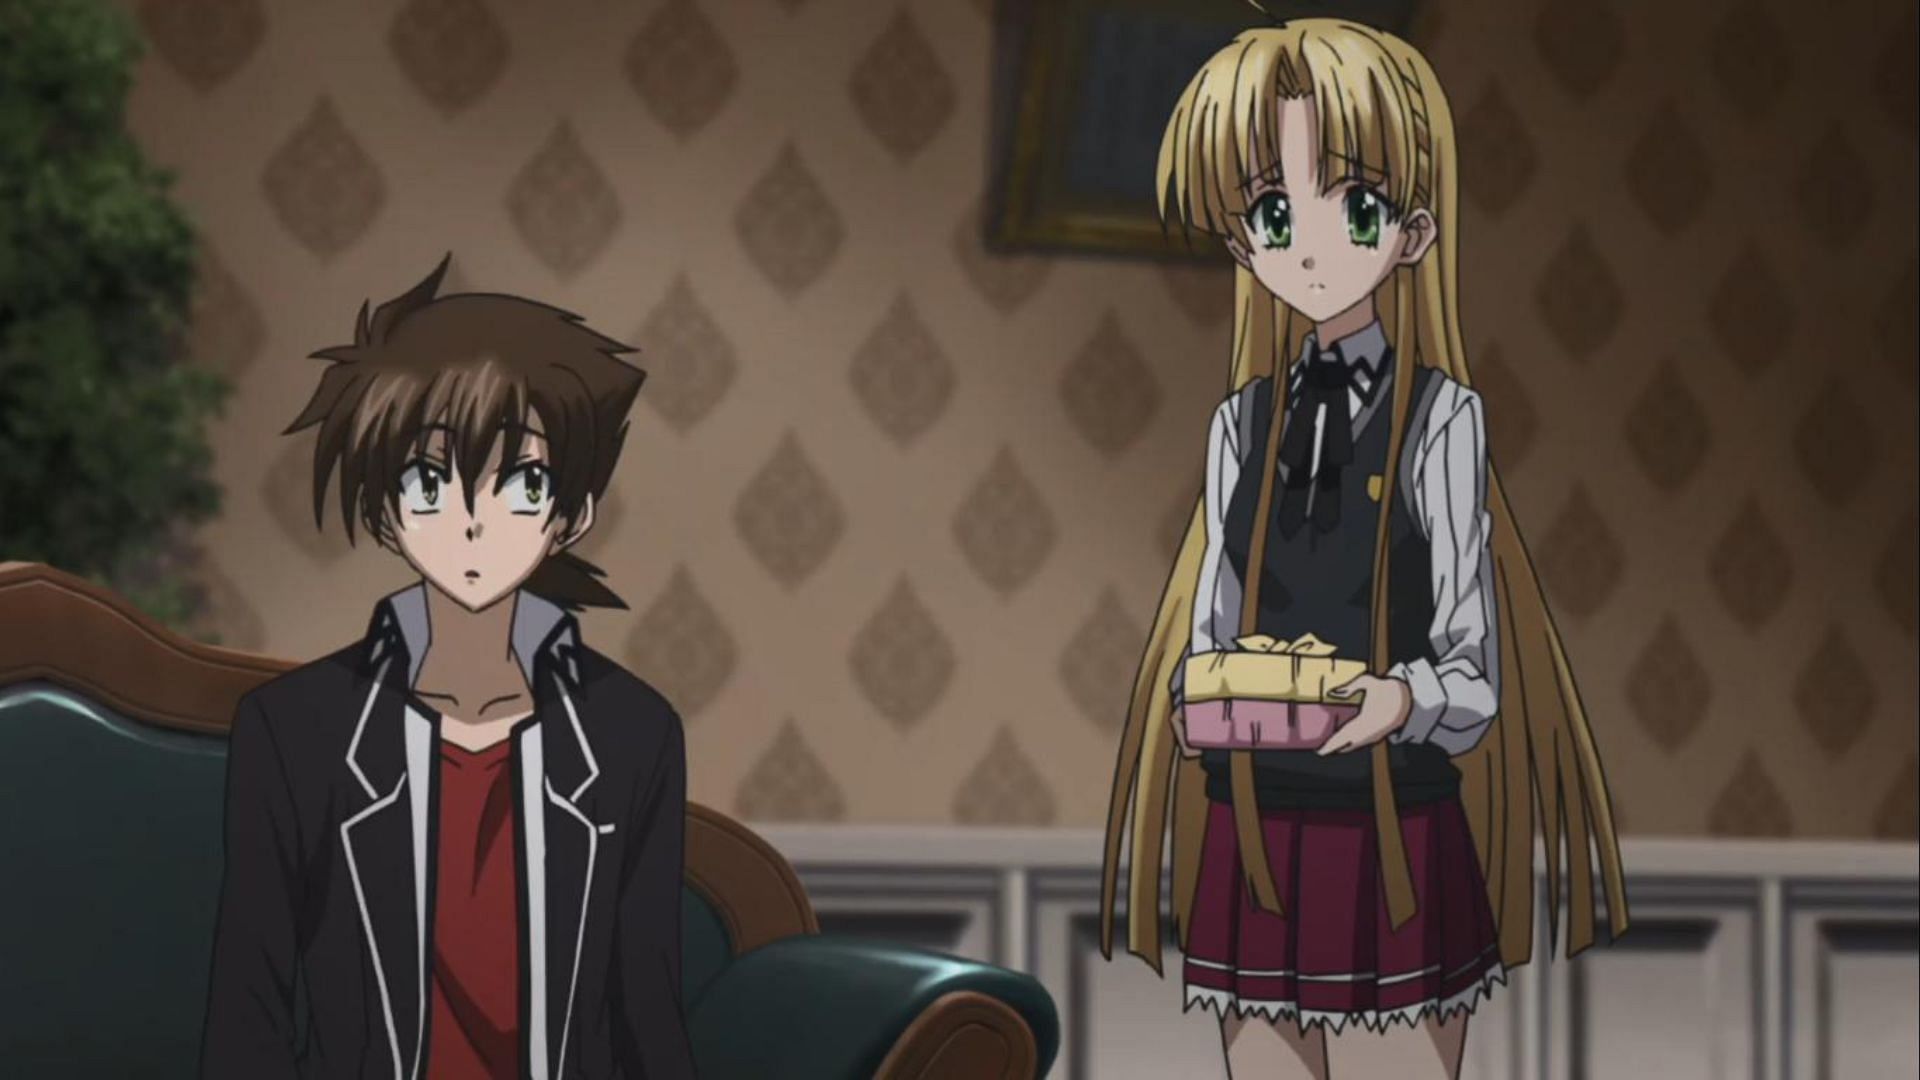 Cast of High School DXD as shown in anime (Image via Studio TNK)